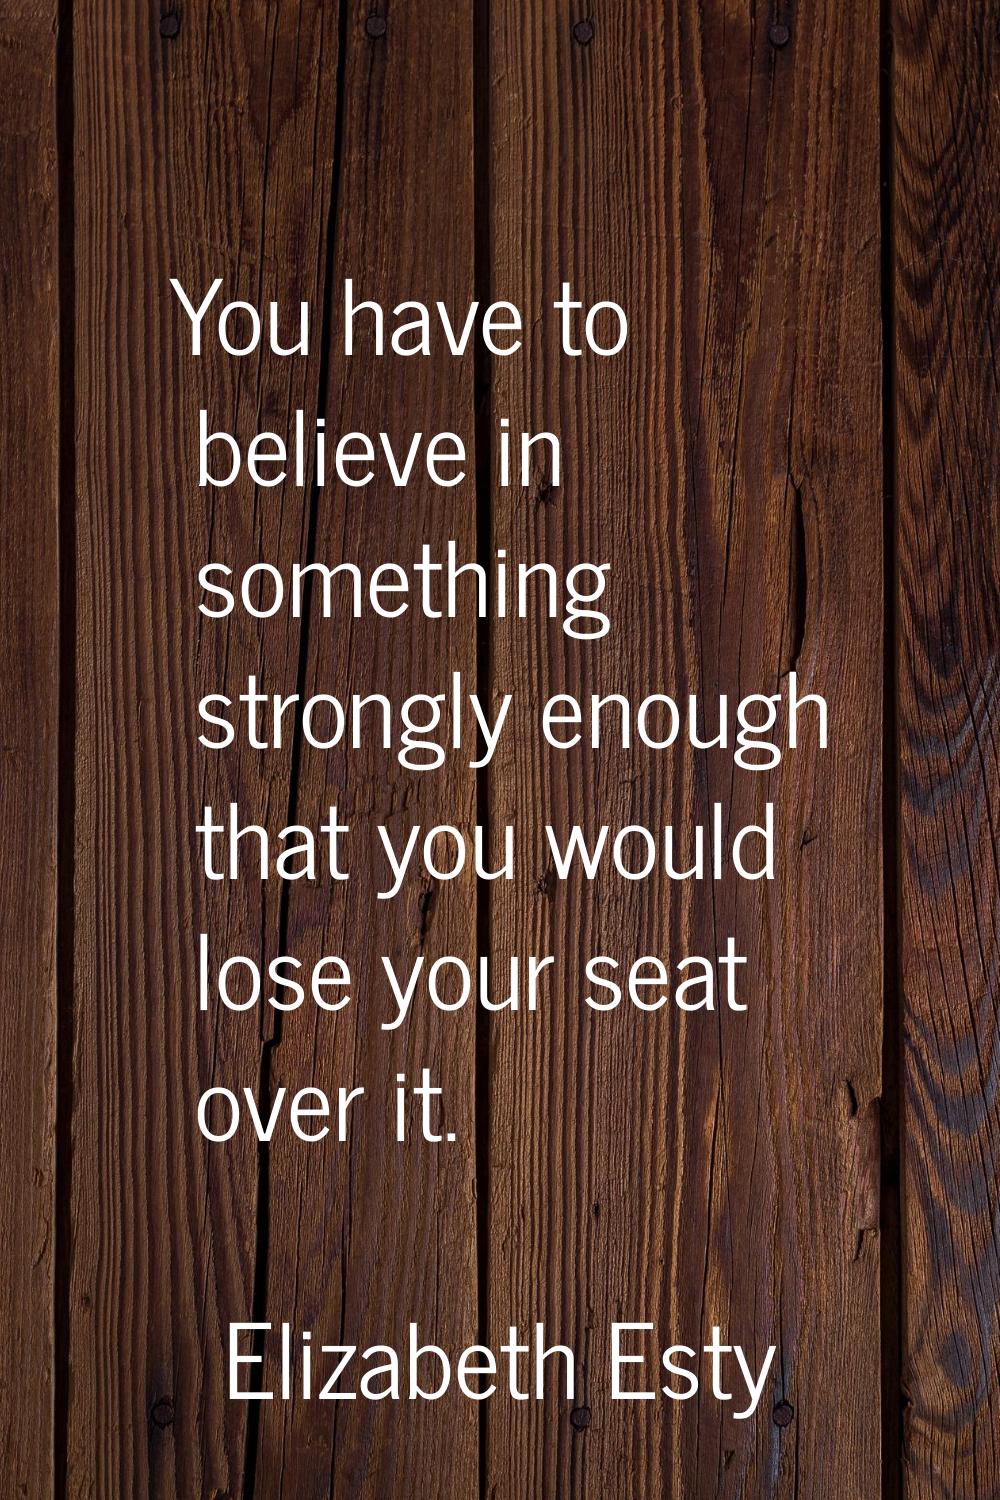 You have to believe in something strongly enough that you would lose your seat over it.